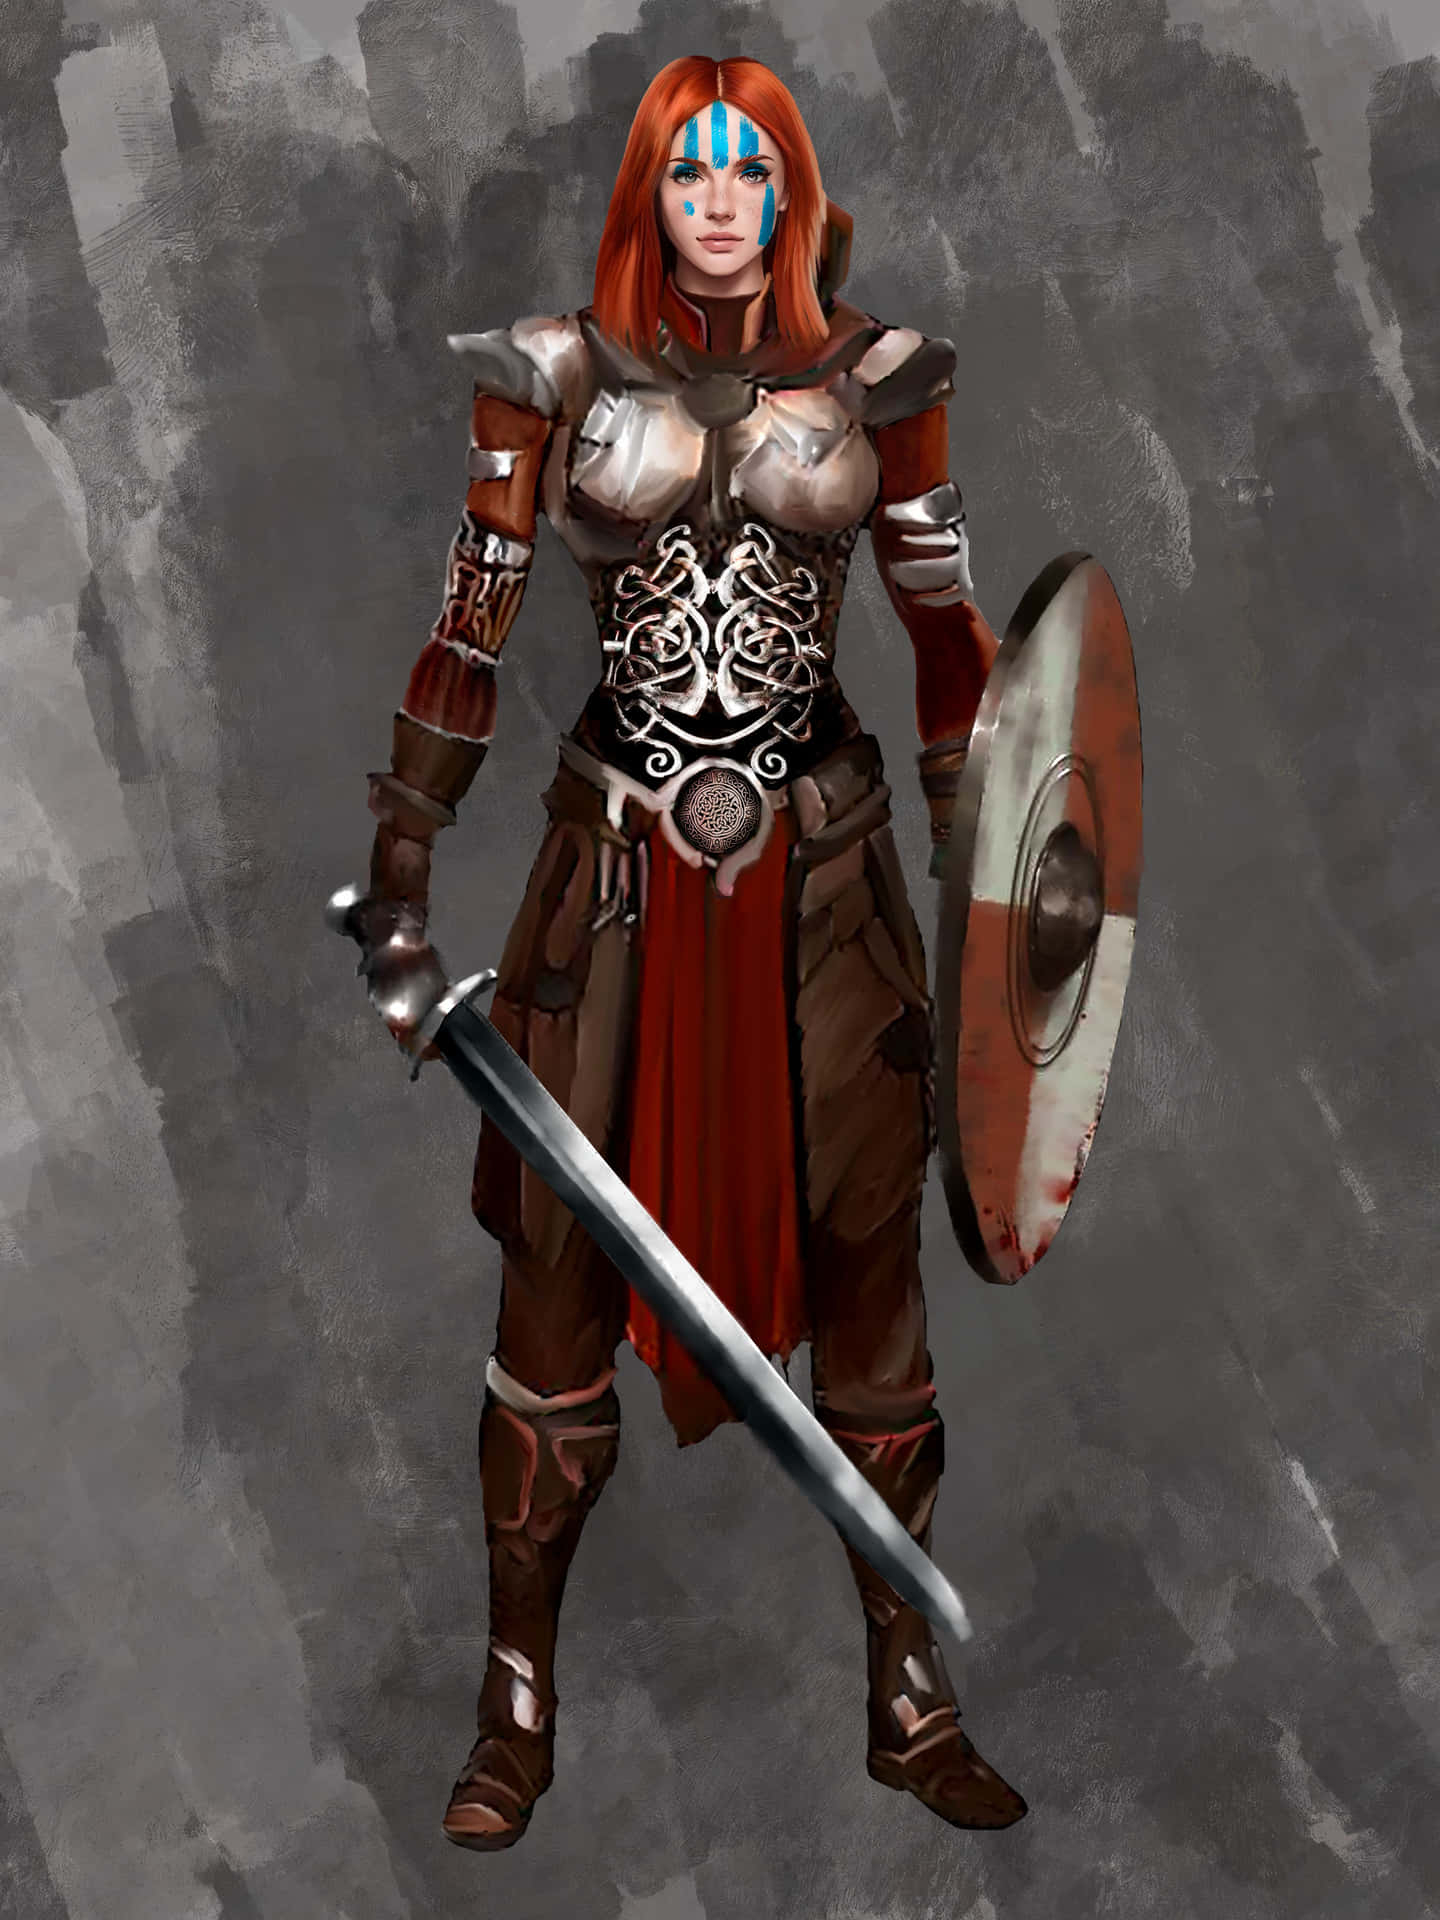 A Female Warrior With A Sword And Shield